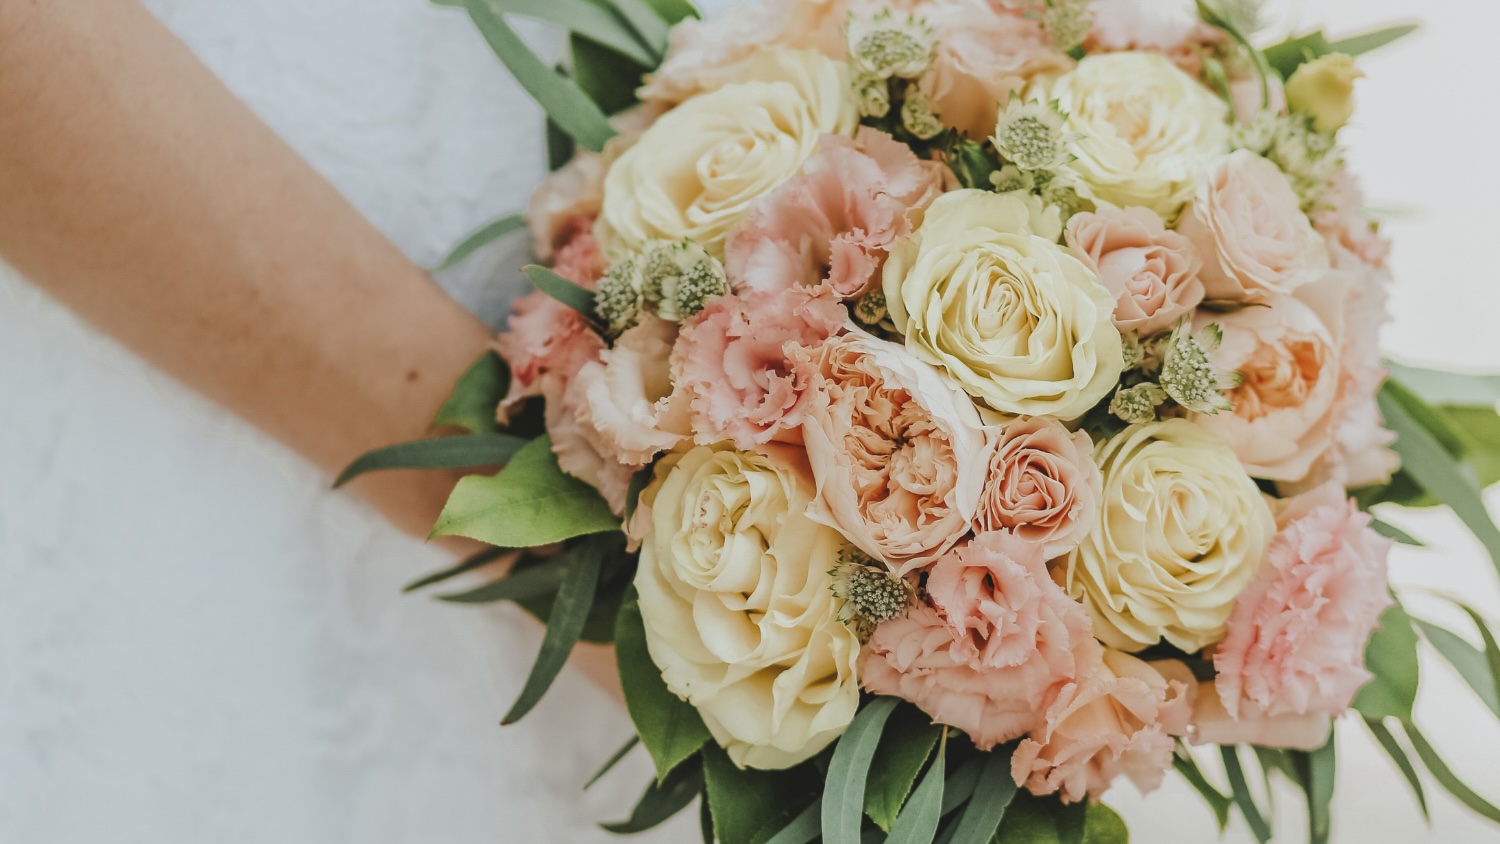 How To Pick Floral Arrangements For Weddings